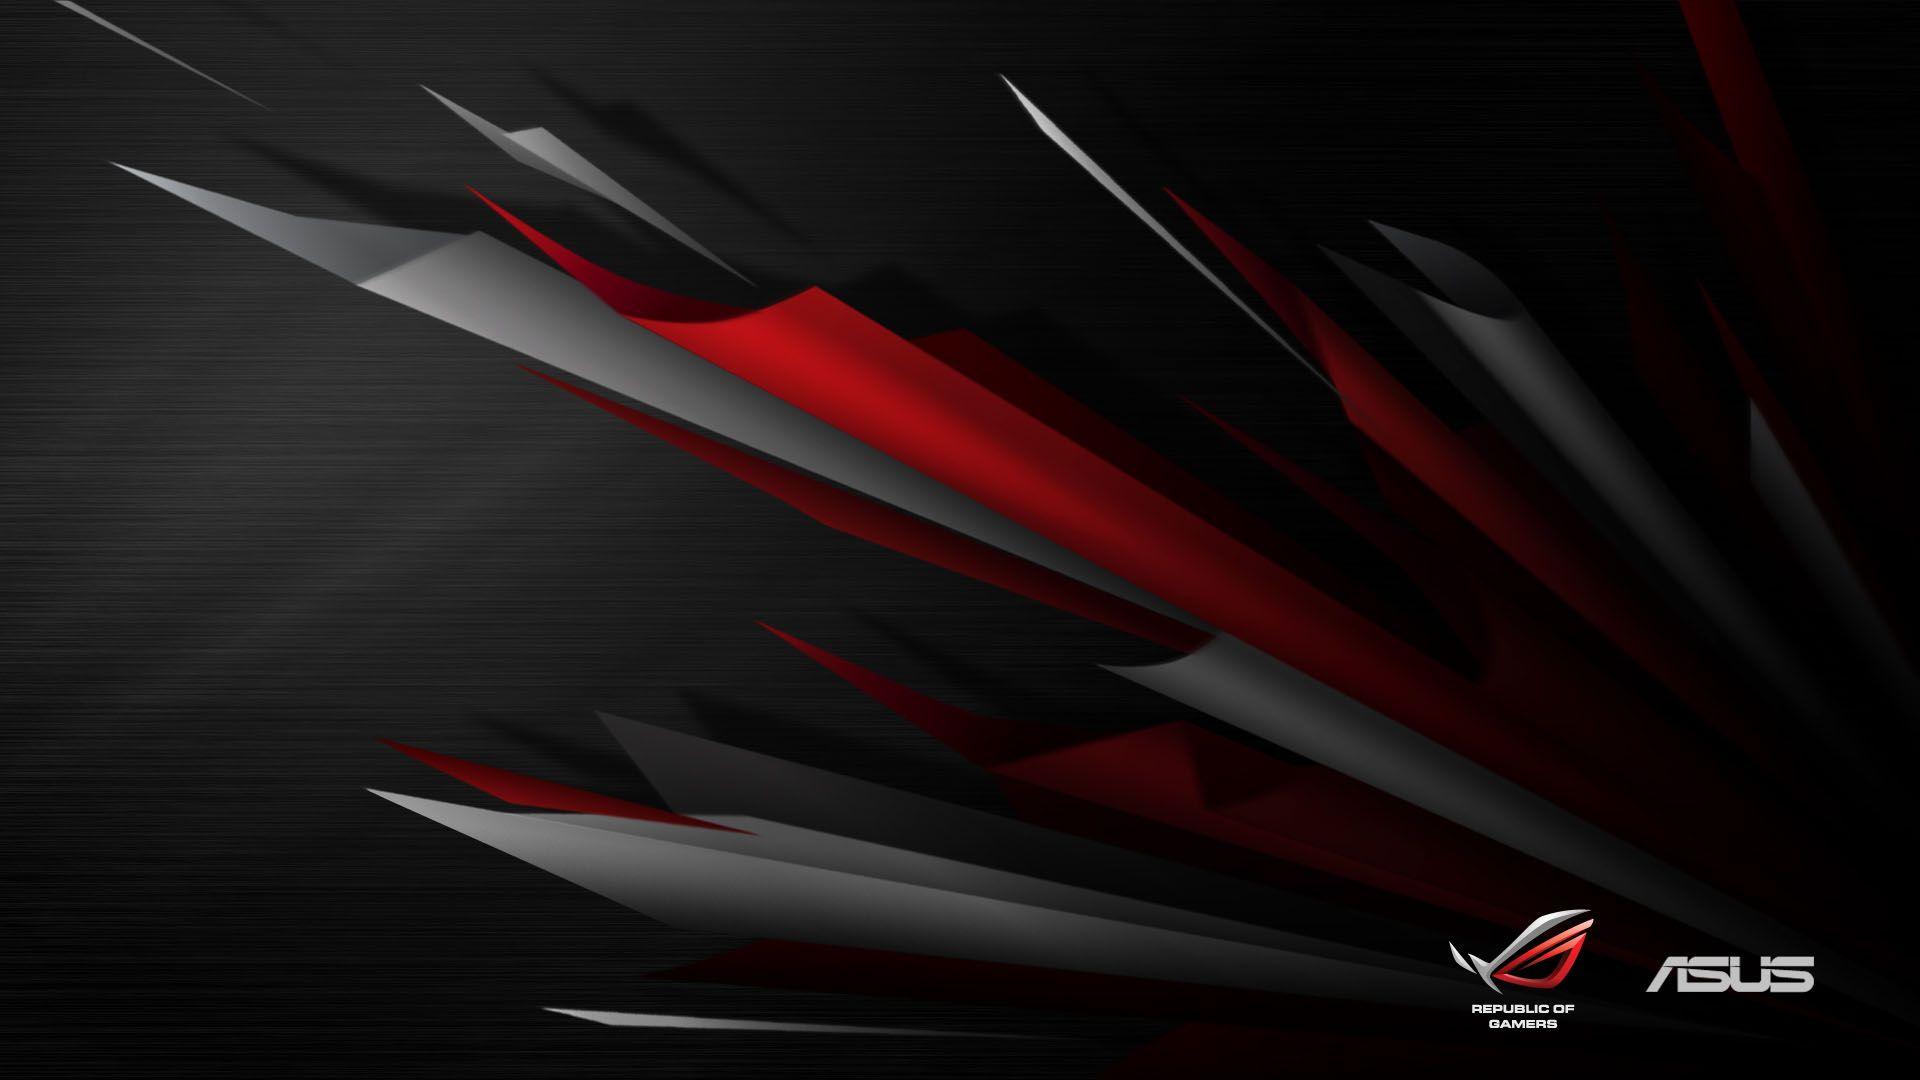 ROG of Gamers｜Global. The Choice of Champions. Wallpaper pc, Desktop picture, Technology wallpaper